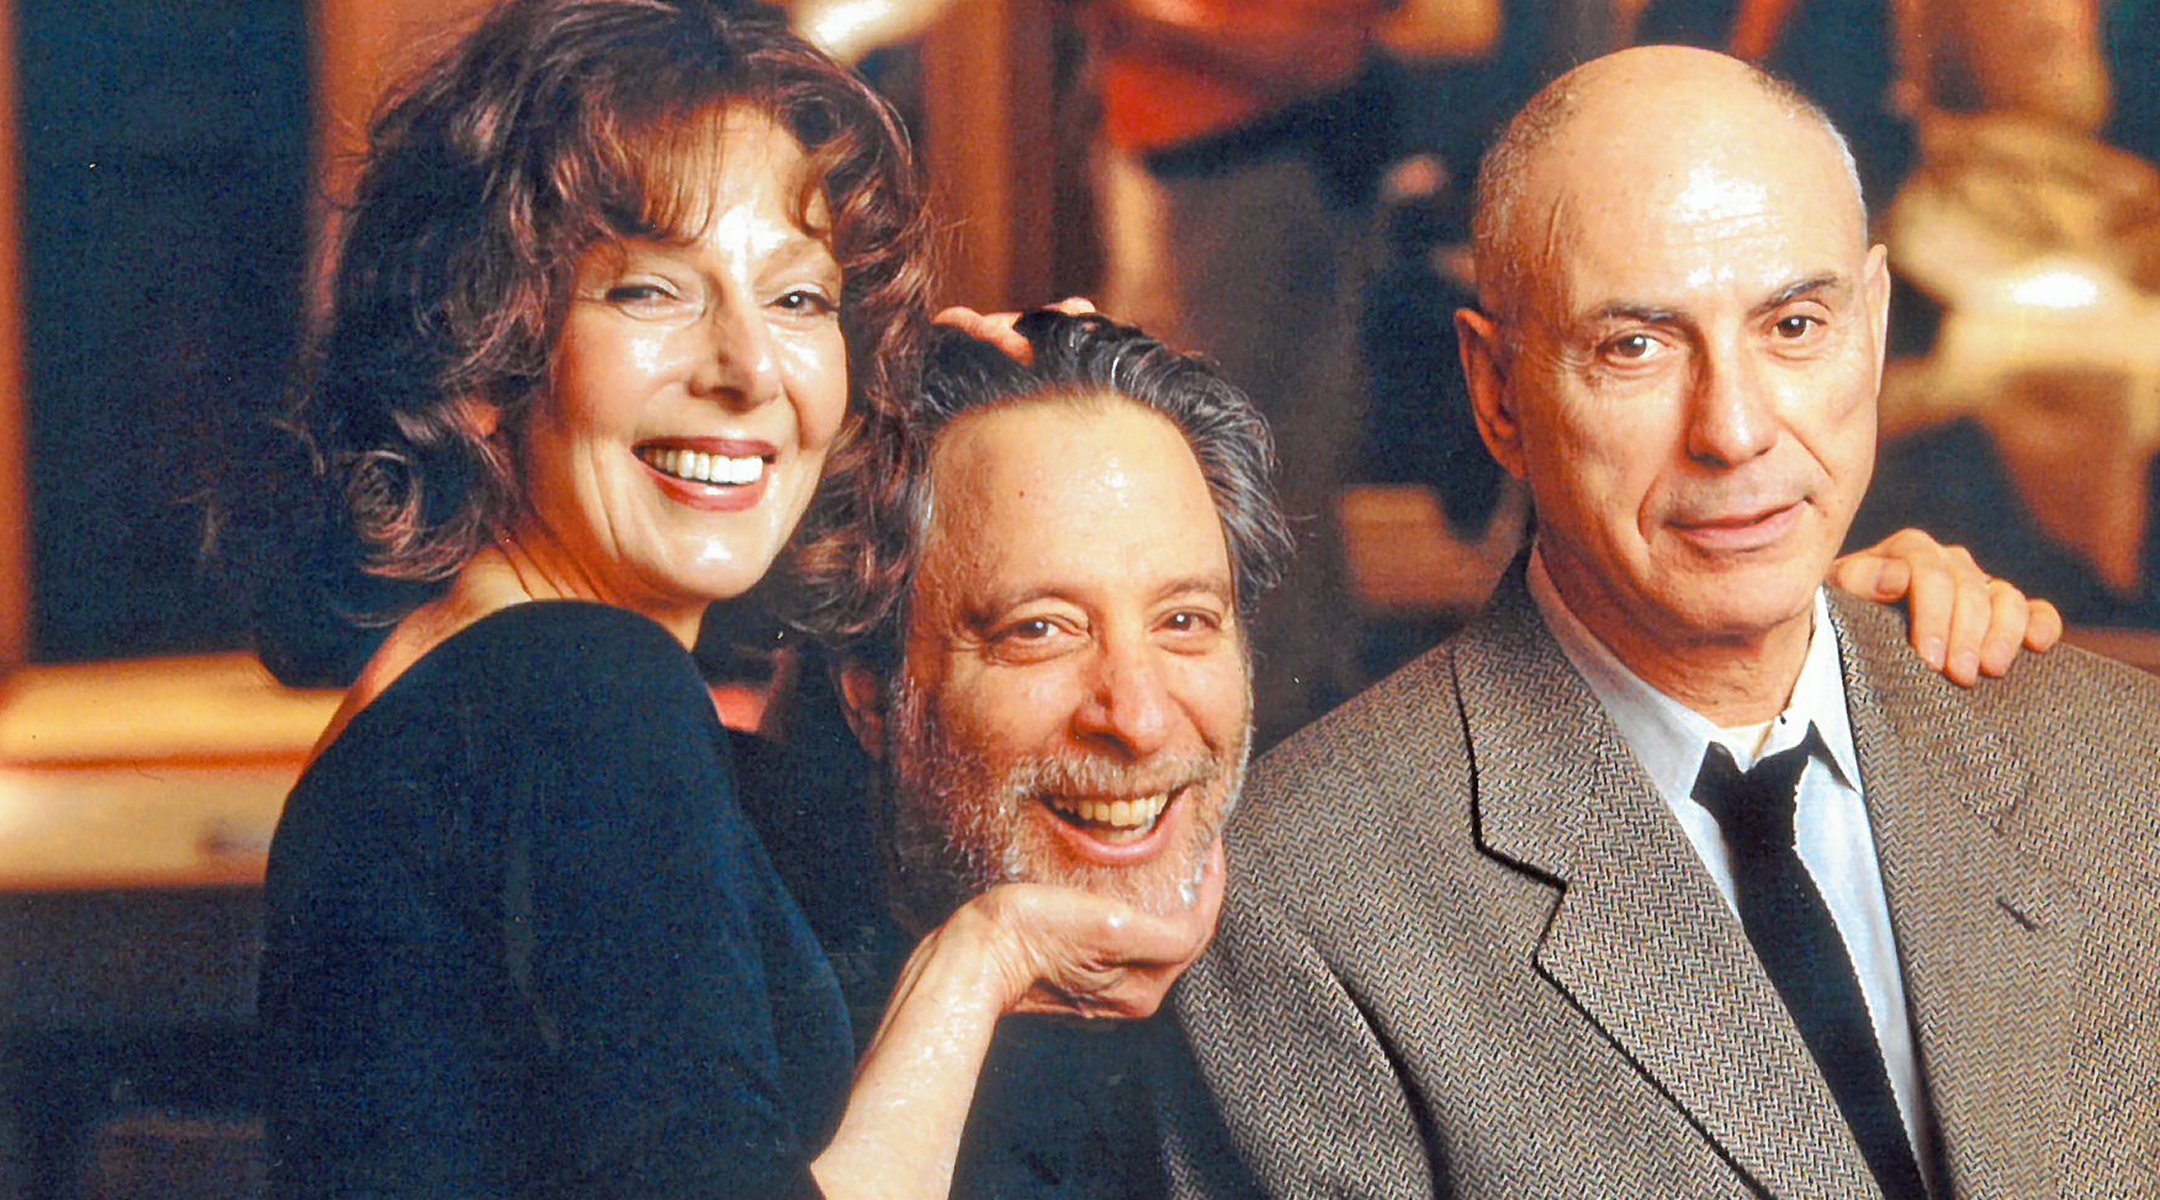 Julian Schlossberg, center, is shown with Elaine May and Alan Arkin. Schlossberg’s memoir looks back at all the celebrities he met — many of them Jewish — during his career as a prolific producer. (Courtesy of Julian Schlossberg)